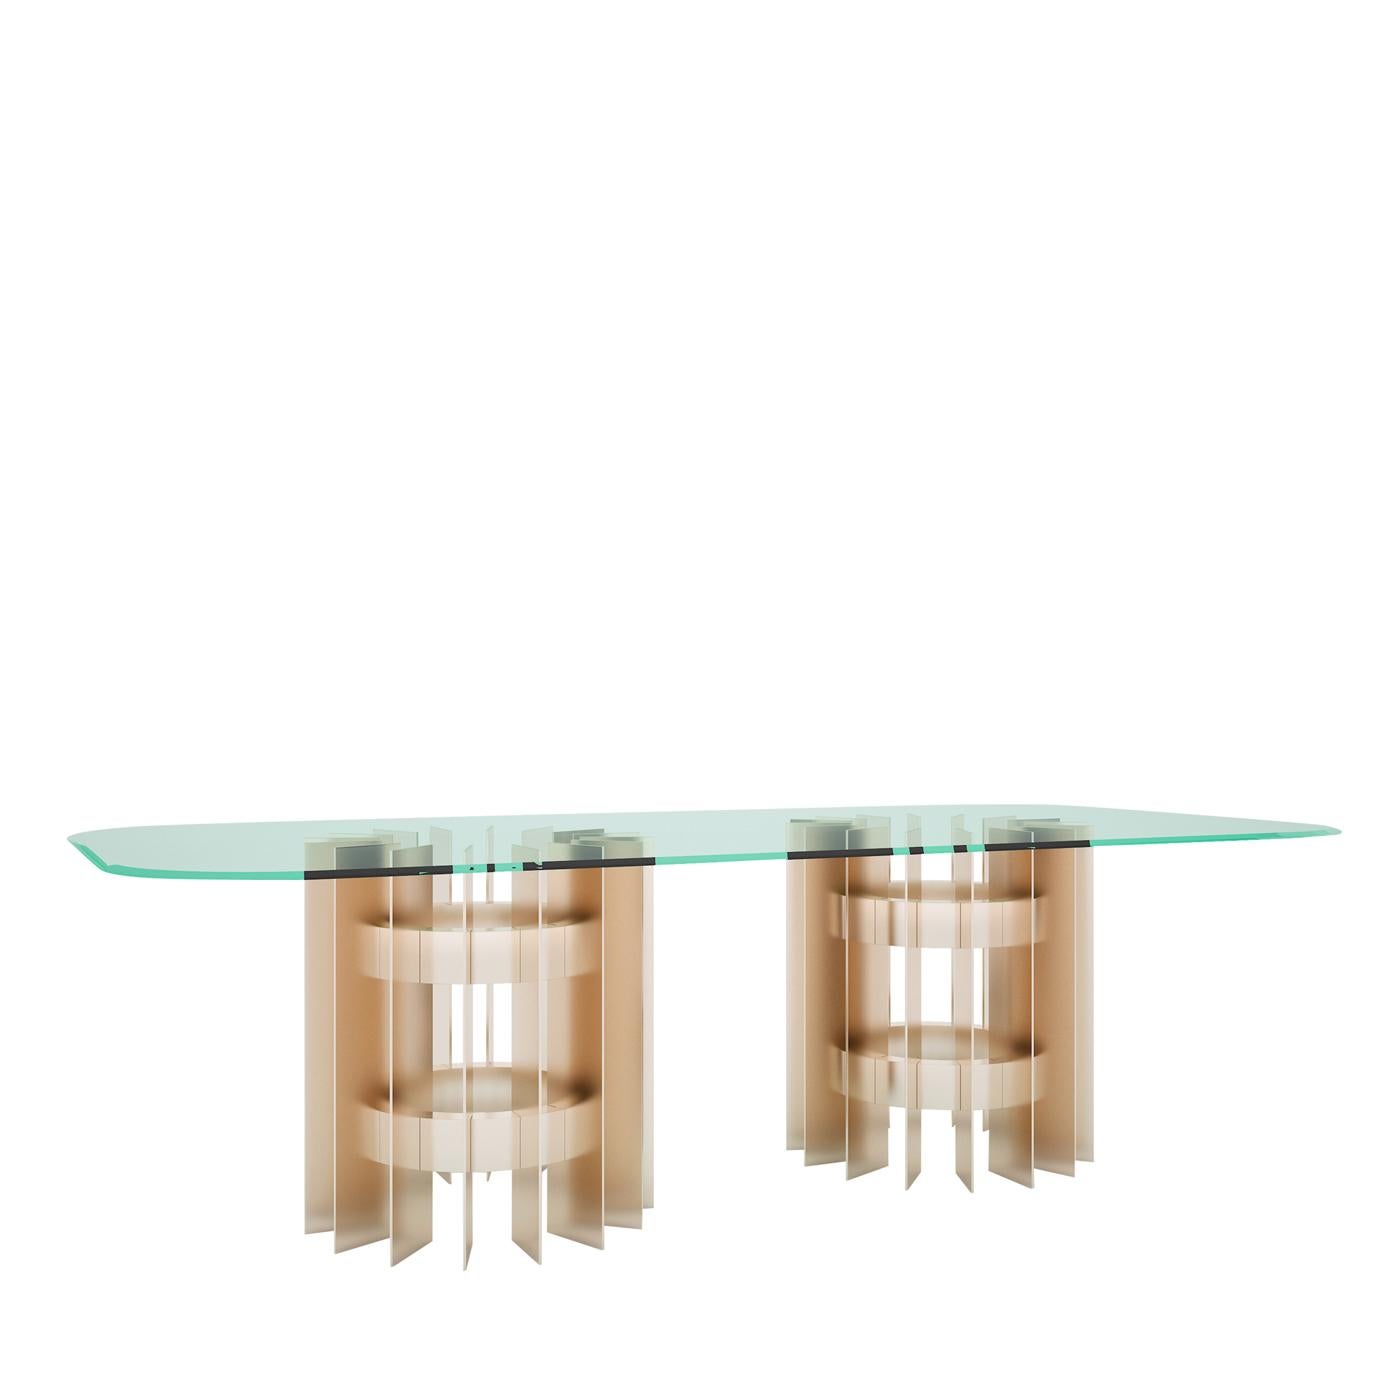 Imposing and delicate at the same time, due to the seductive interplay of voids and solids and transparencies that mark its mesmerizing design, this dining table is a statement piece. The rectangular top (available in different sizes) is in beveled